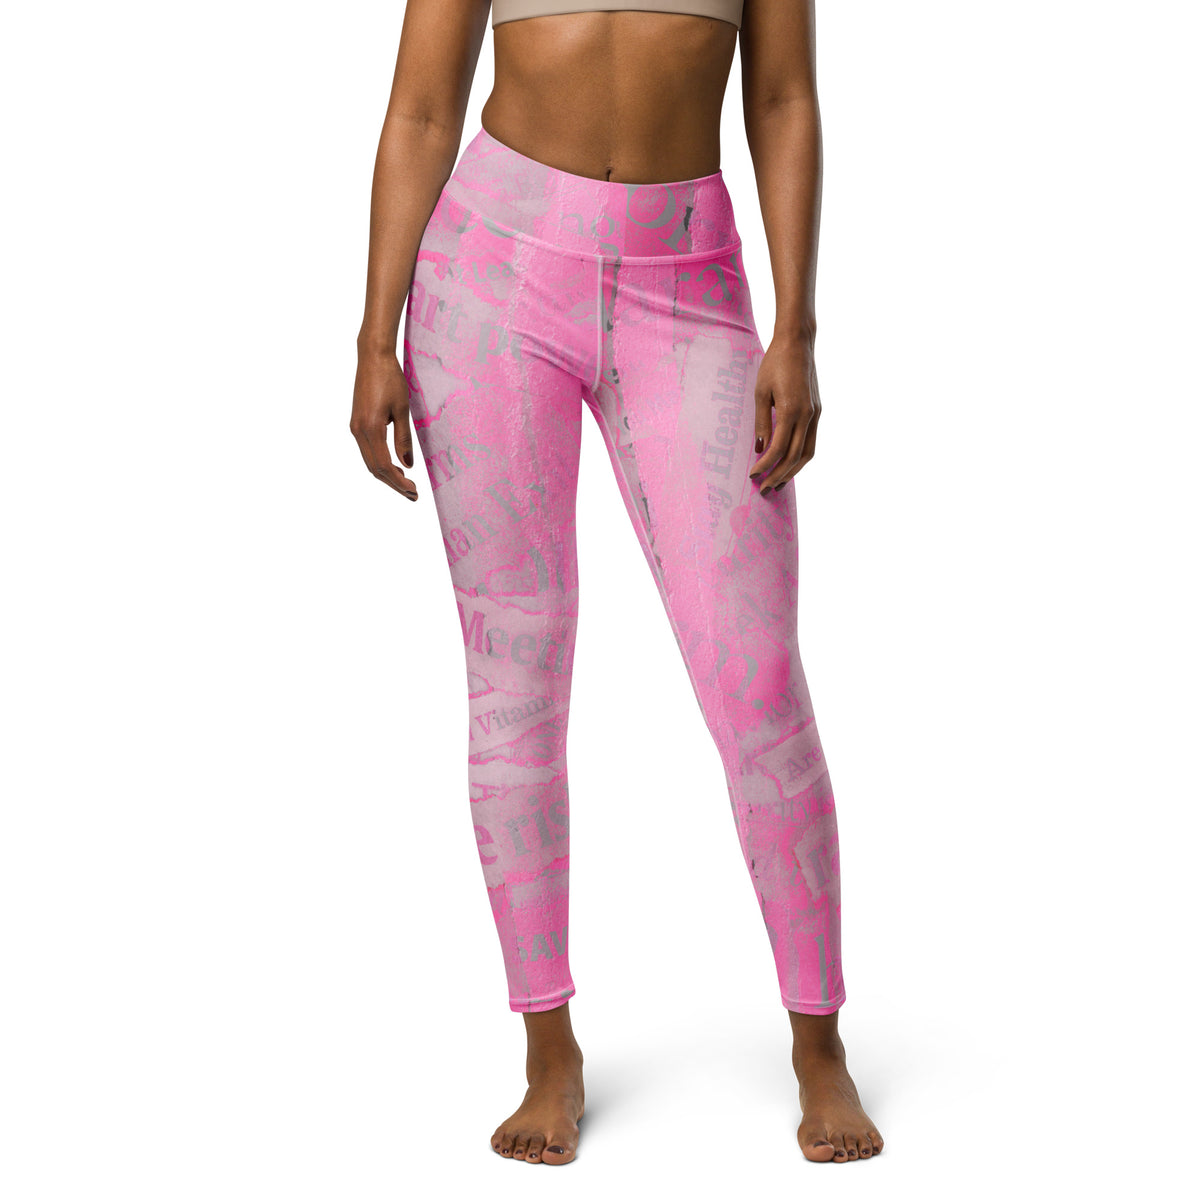 Tabloid Treasures Yoga Leggings styled with accessories for a sporty look.